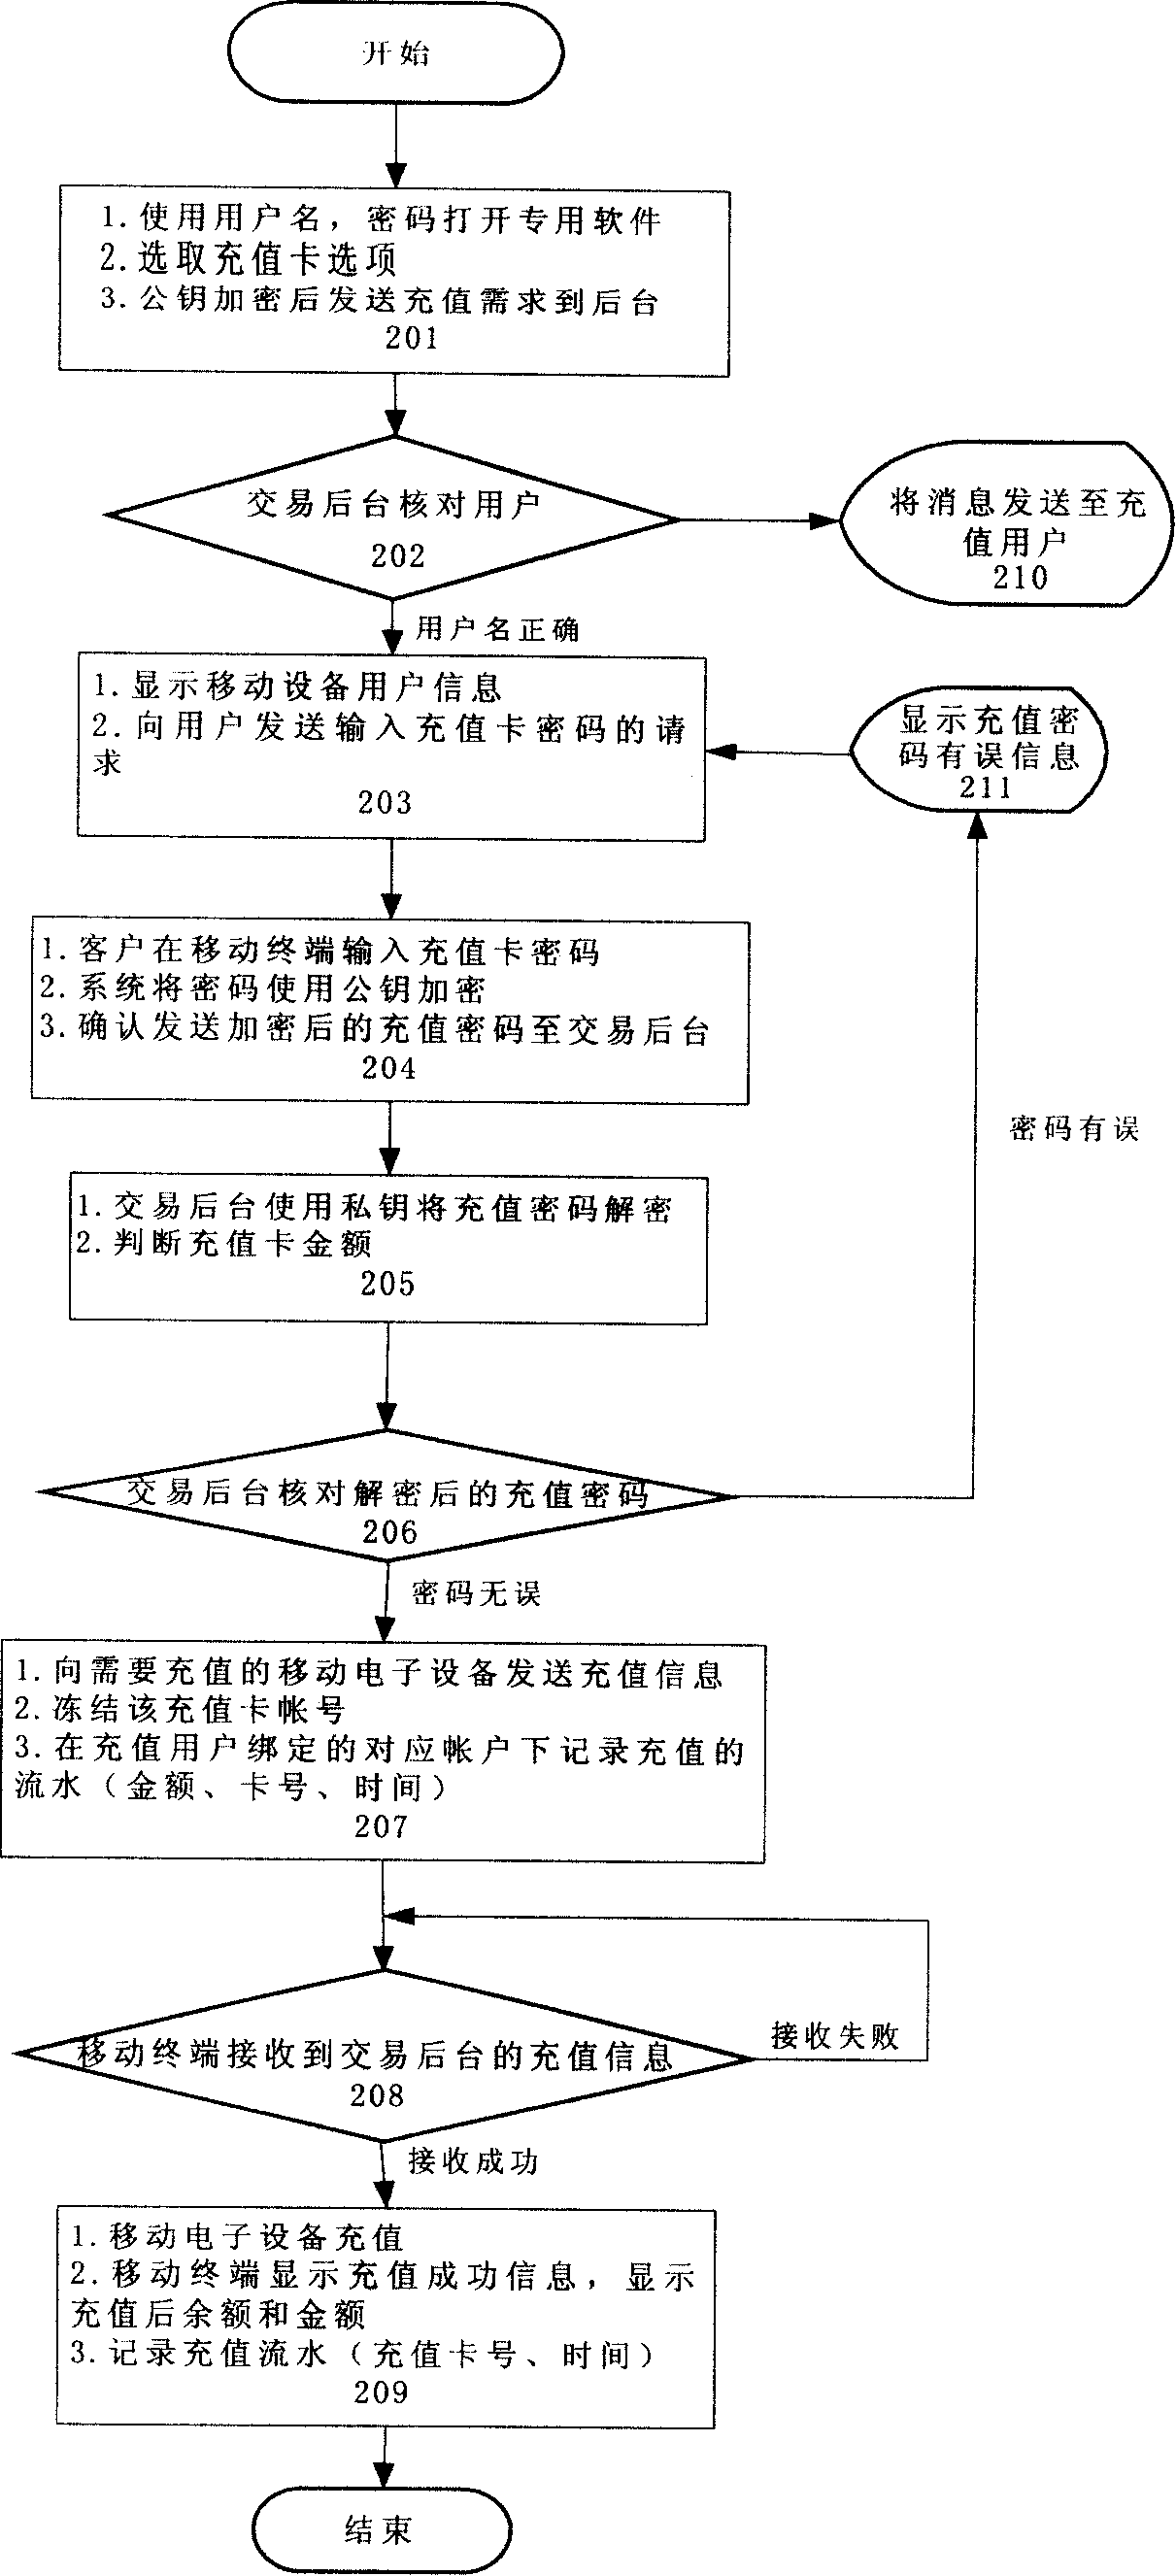 Charging method for mobile electronic payment system